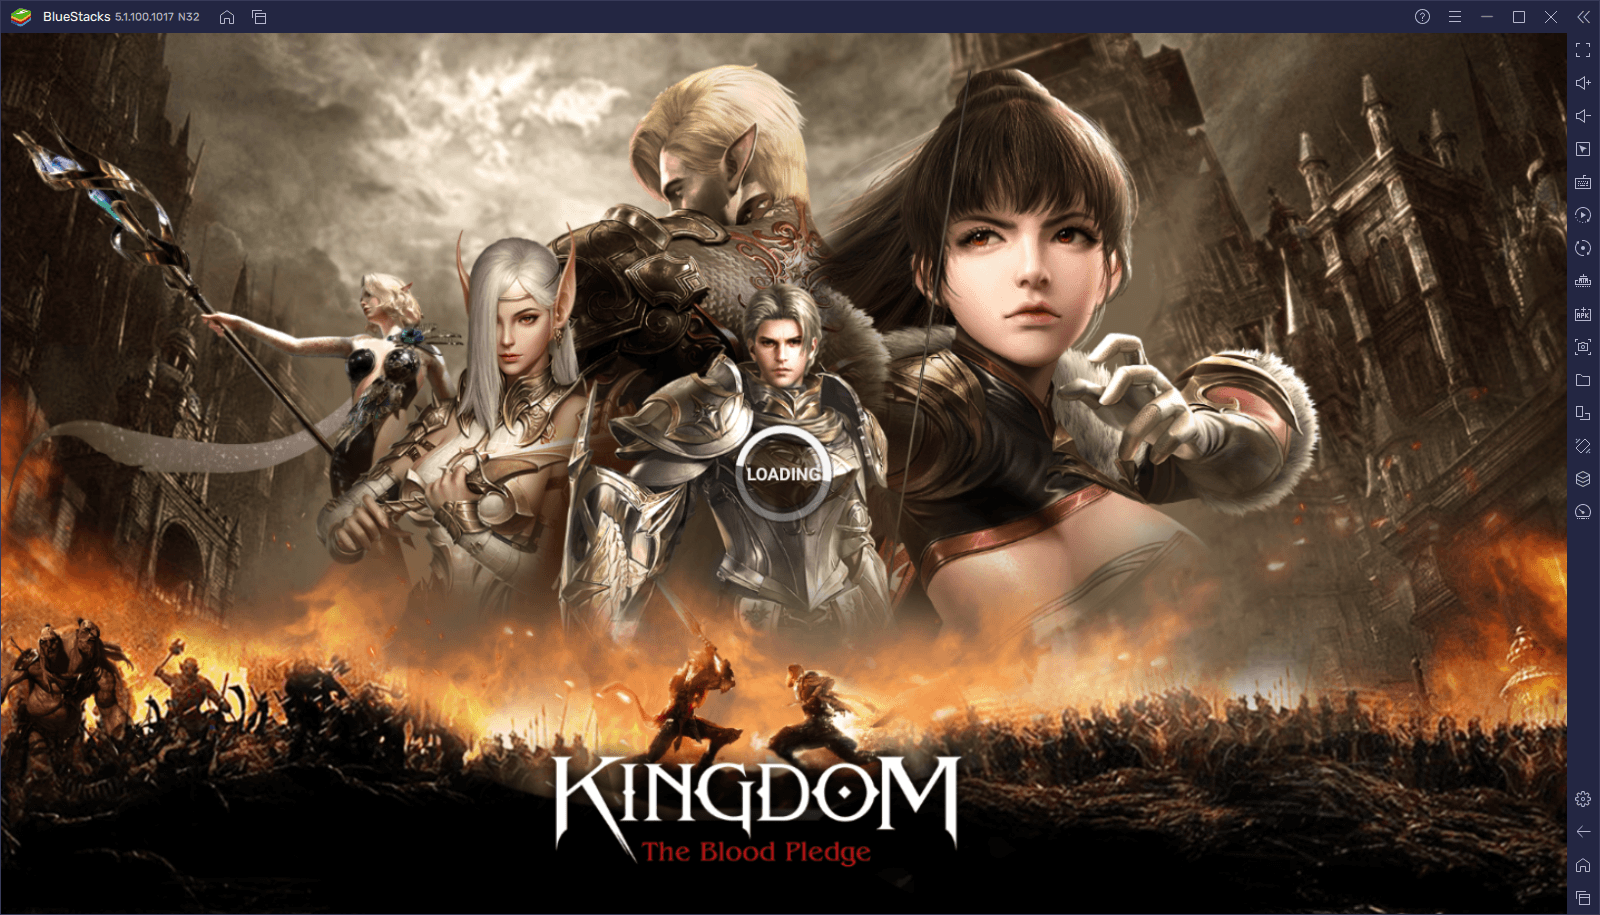 How to Download and Play Kingdom: The Blood Pledge on PC with BlueStacks